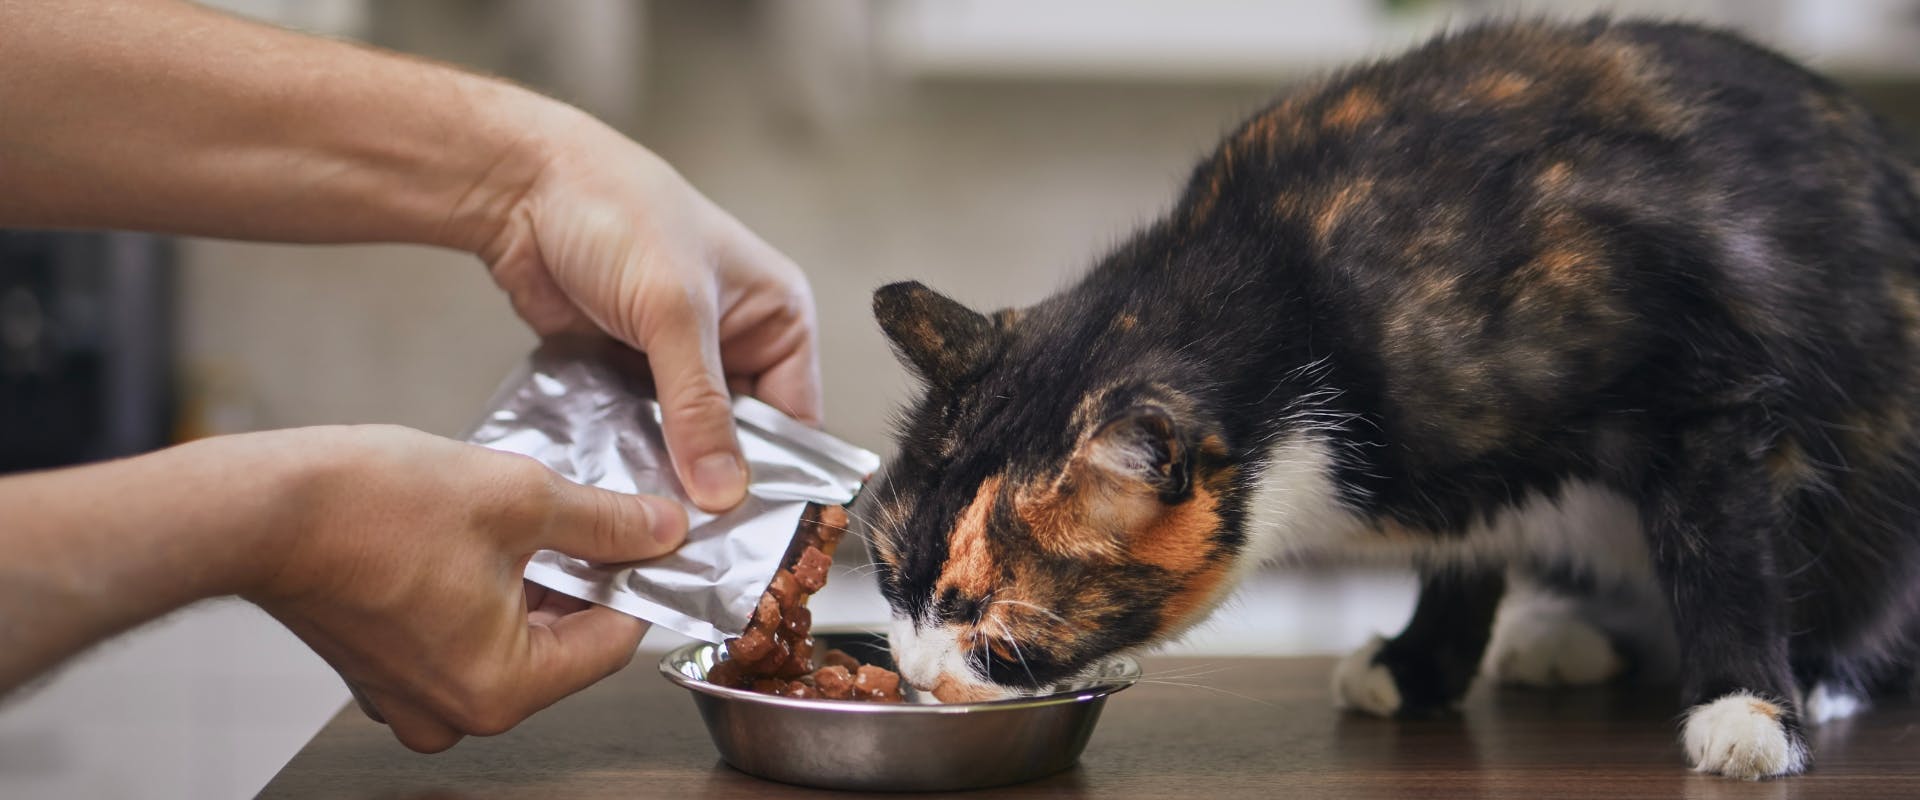 a calico cat eating wet cat food out of a metal bowl whilst a human pours more cat food into the bowl